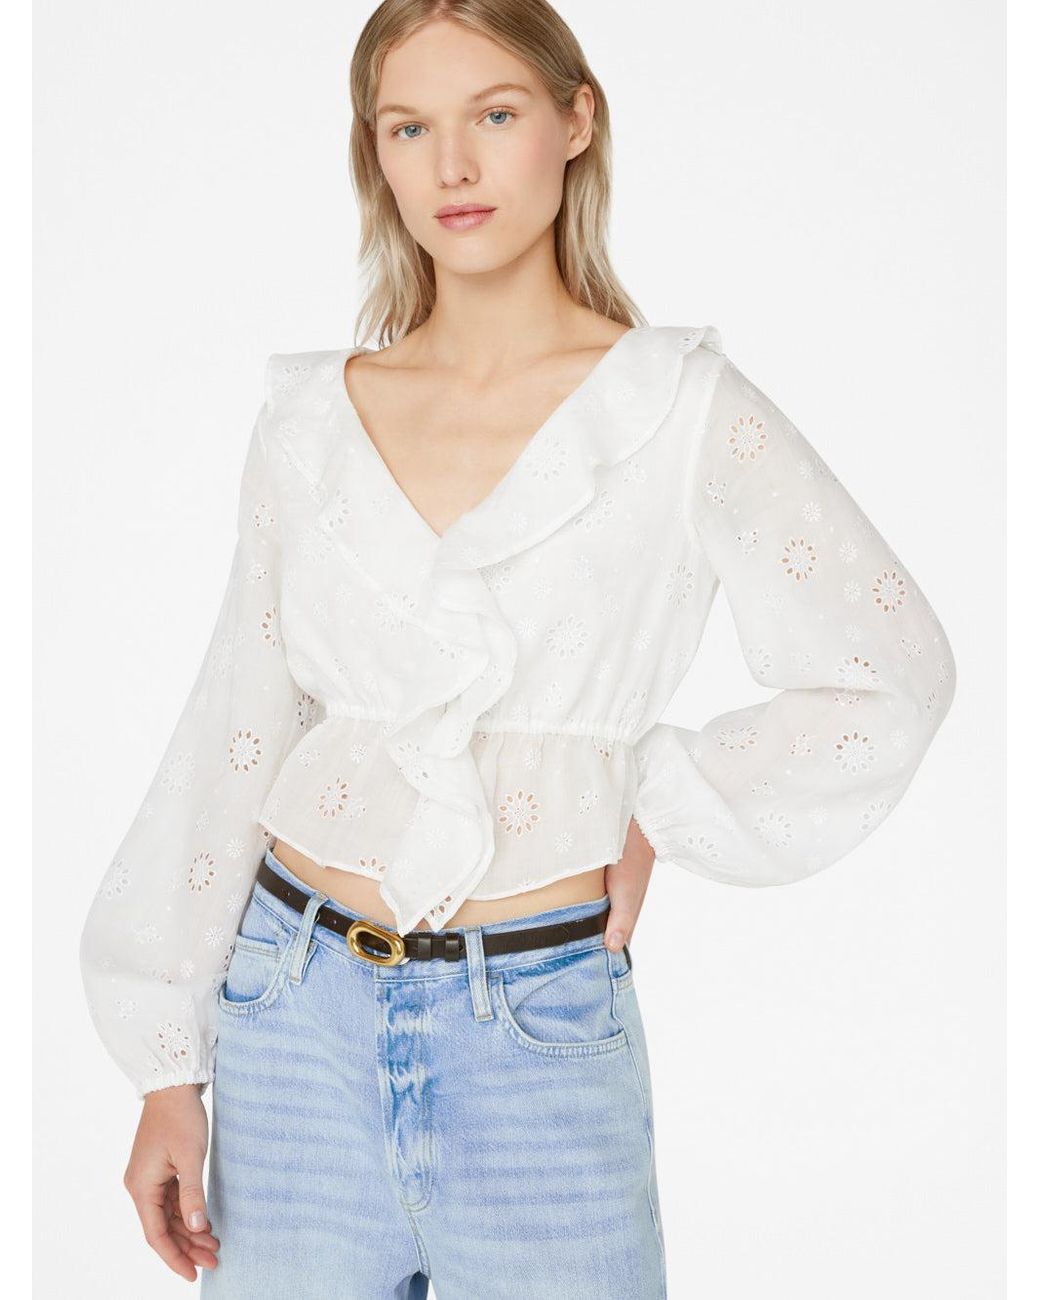 FRAME Ruffle Front Eyelet Top in White | Lyst